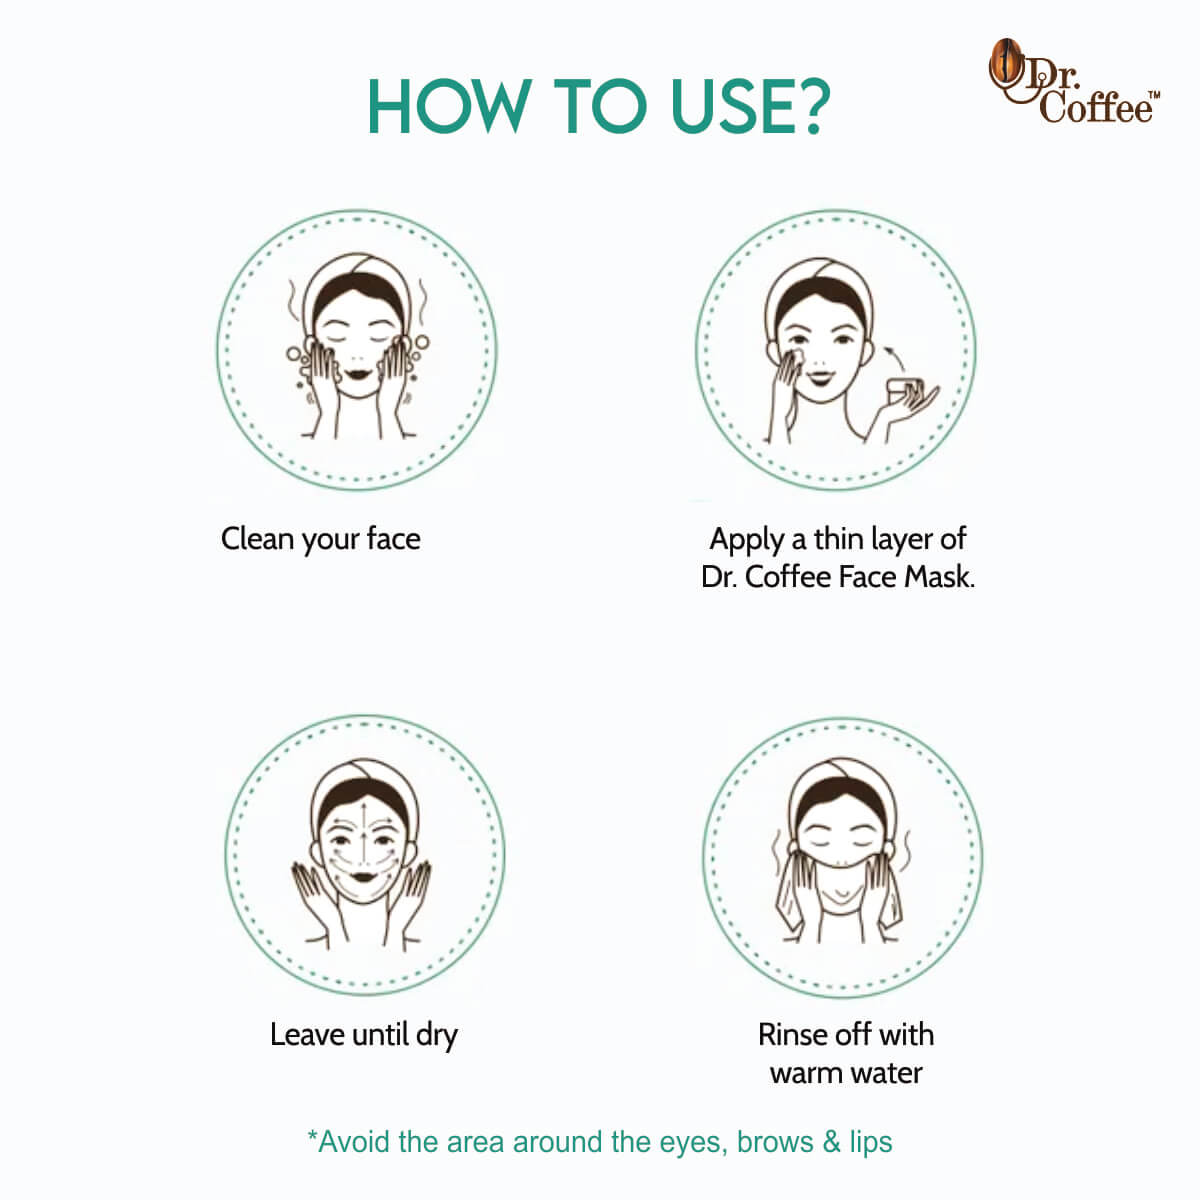 Dr. Coffee Face Mask